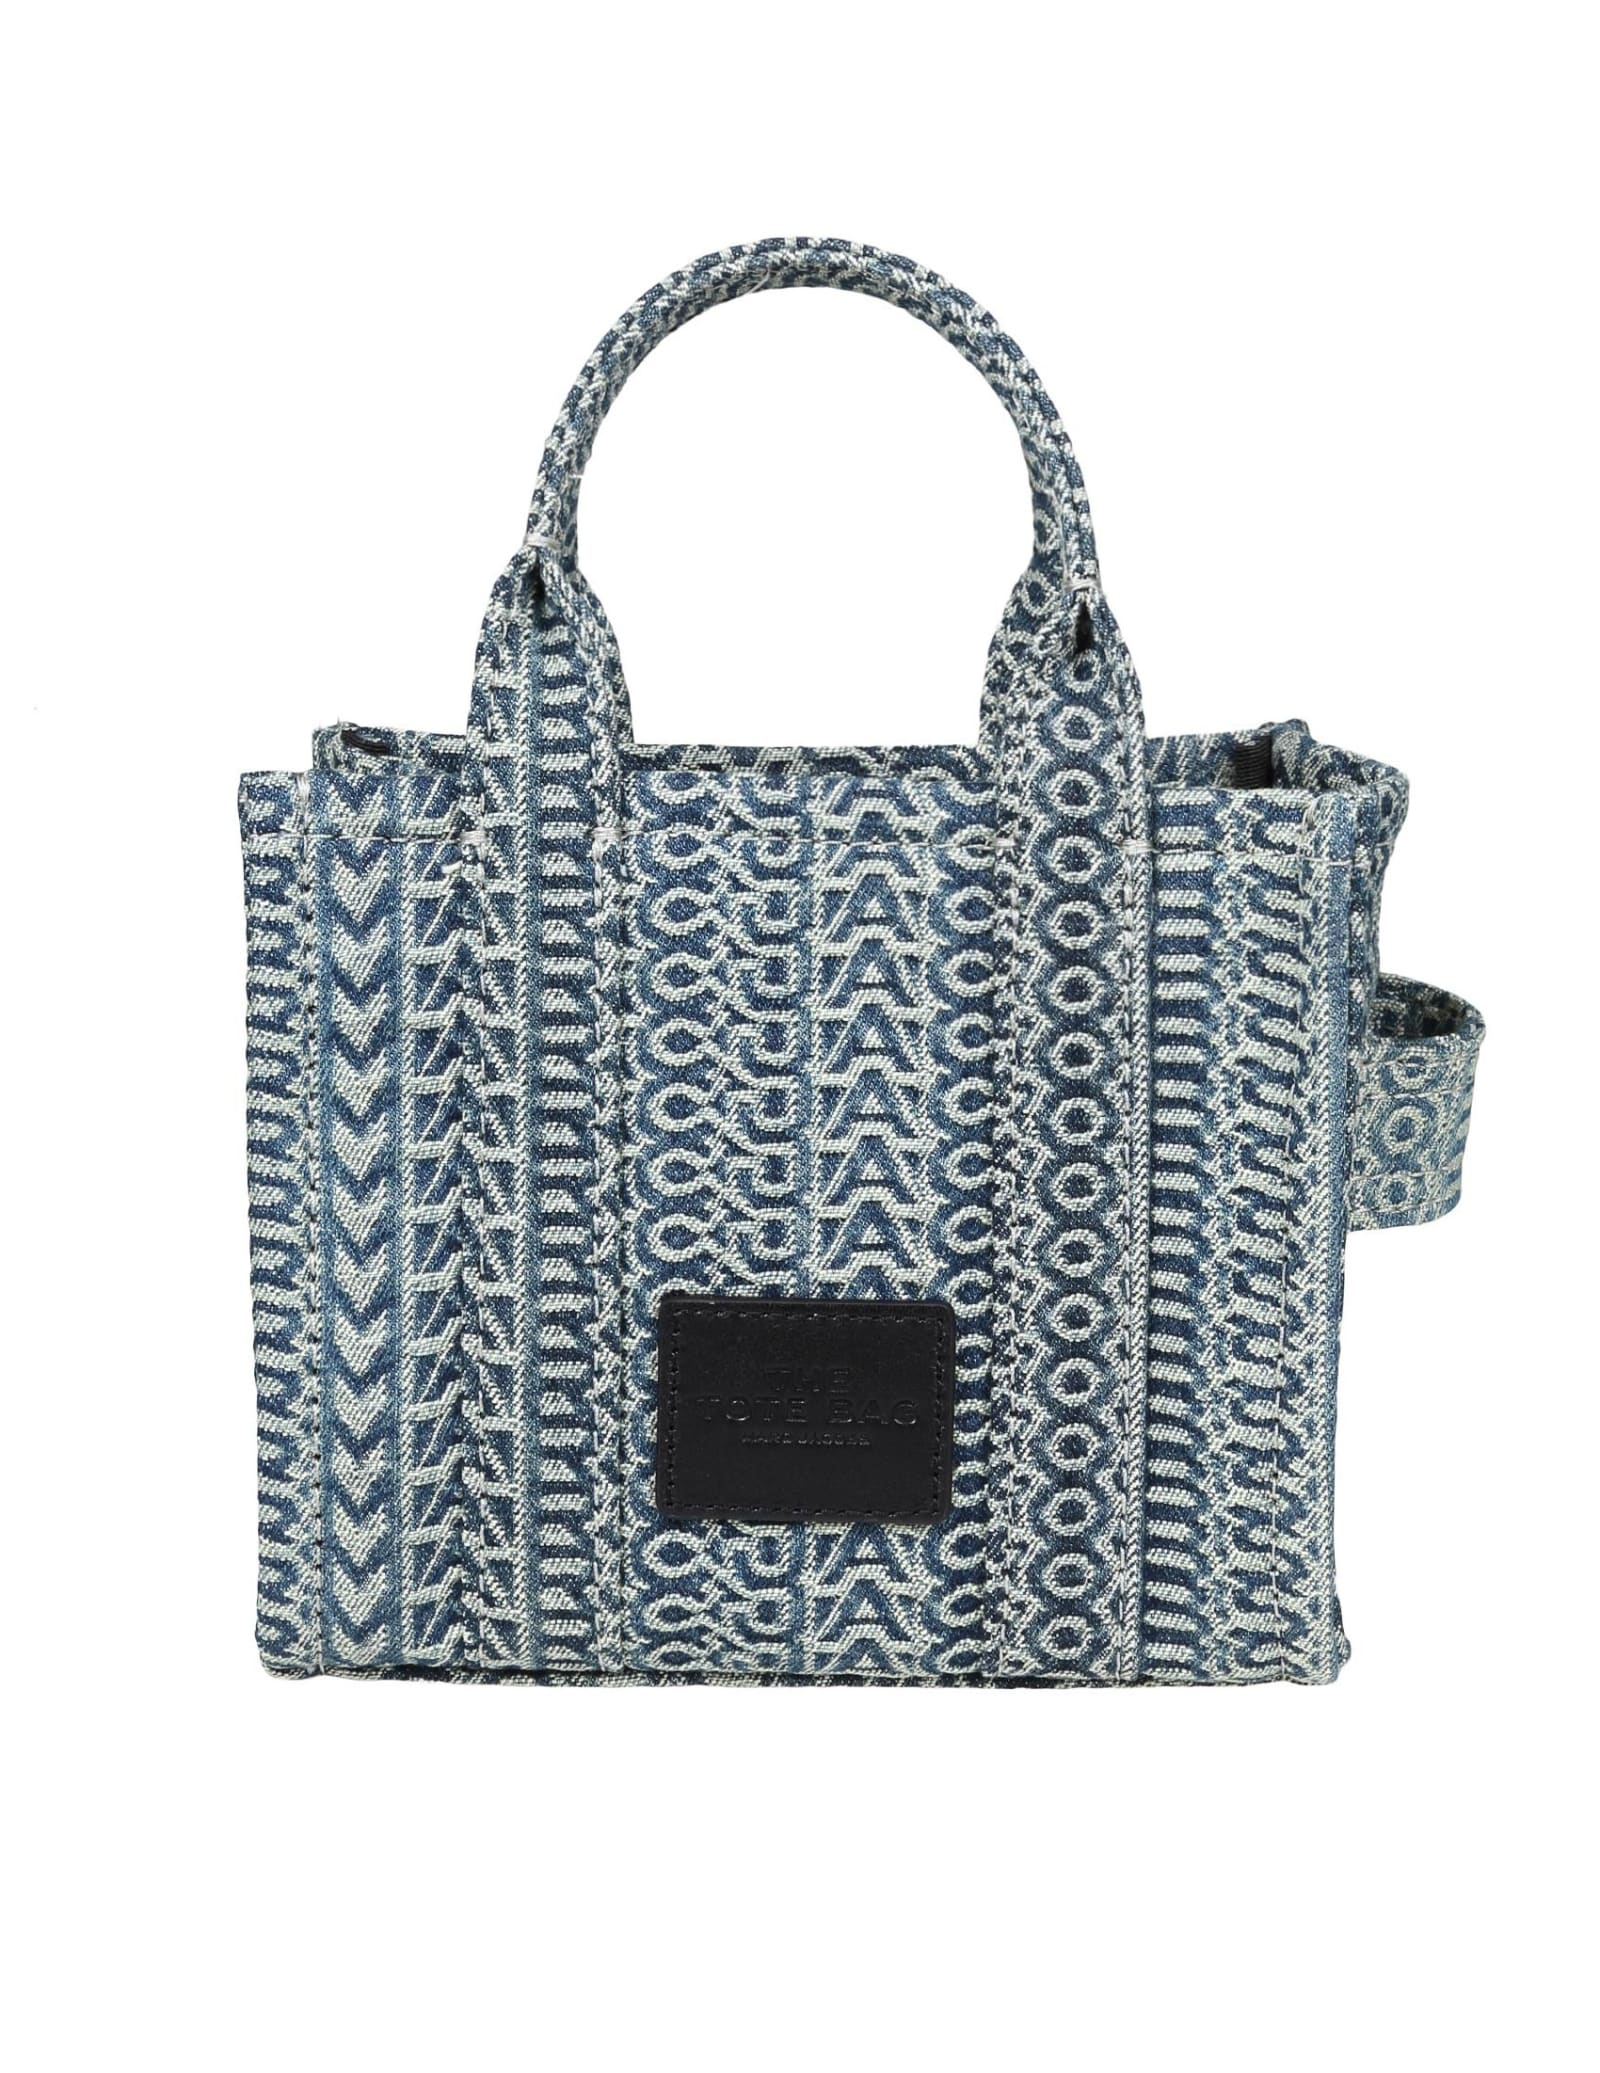 Marc Jacobs Blue Micro The Tote Bag